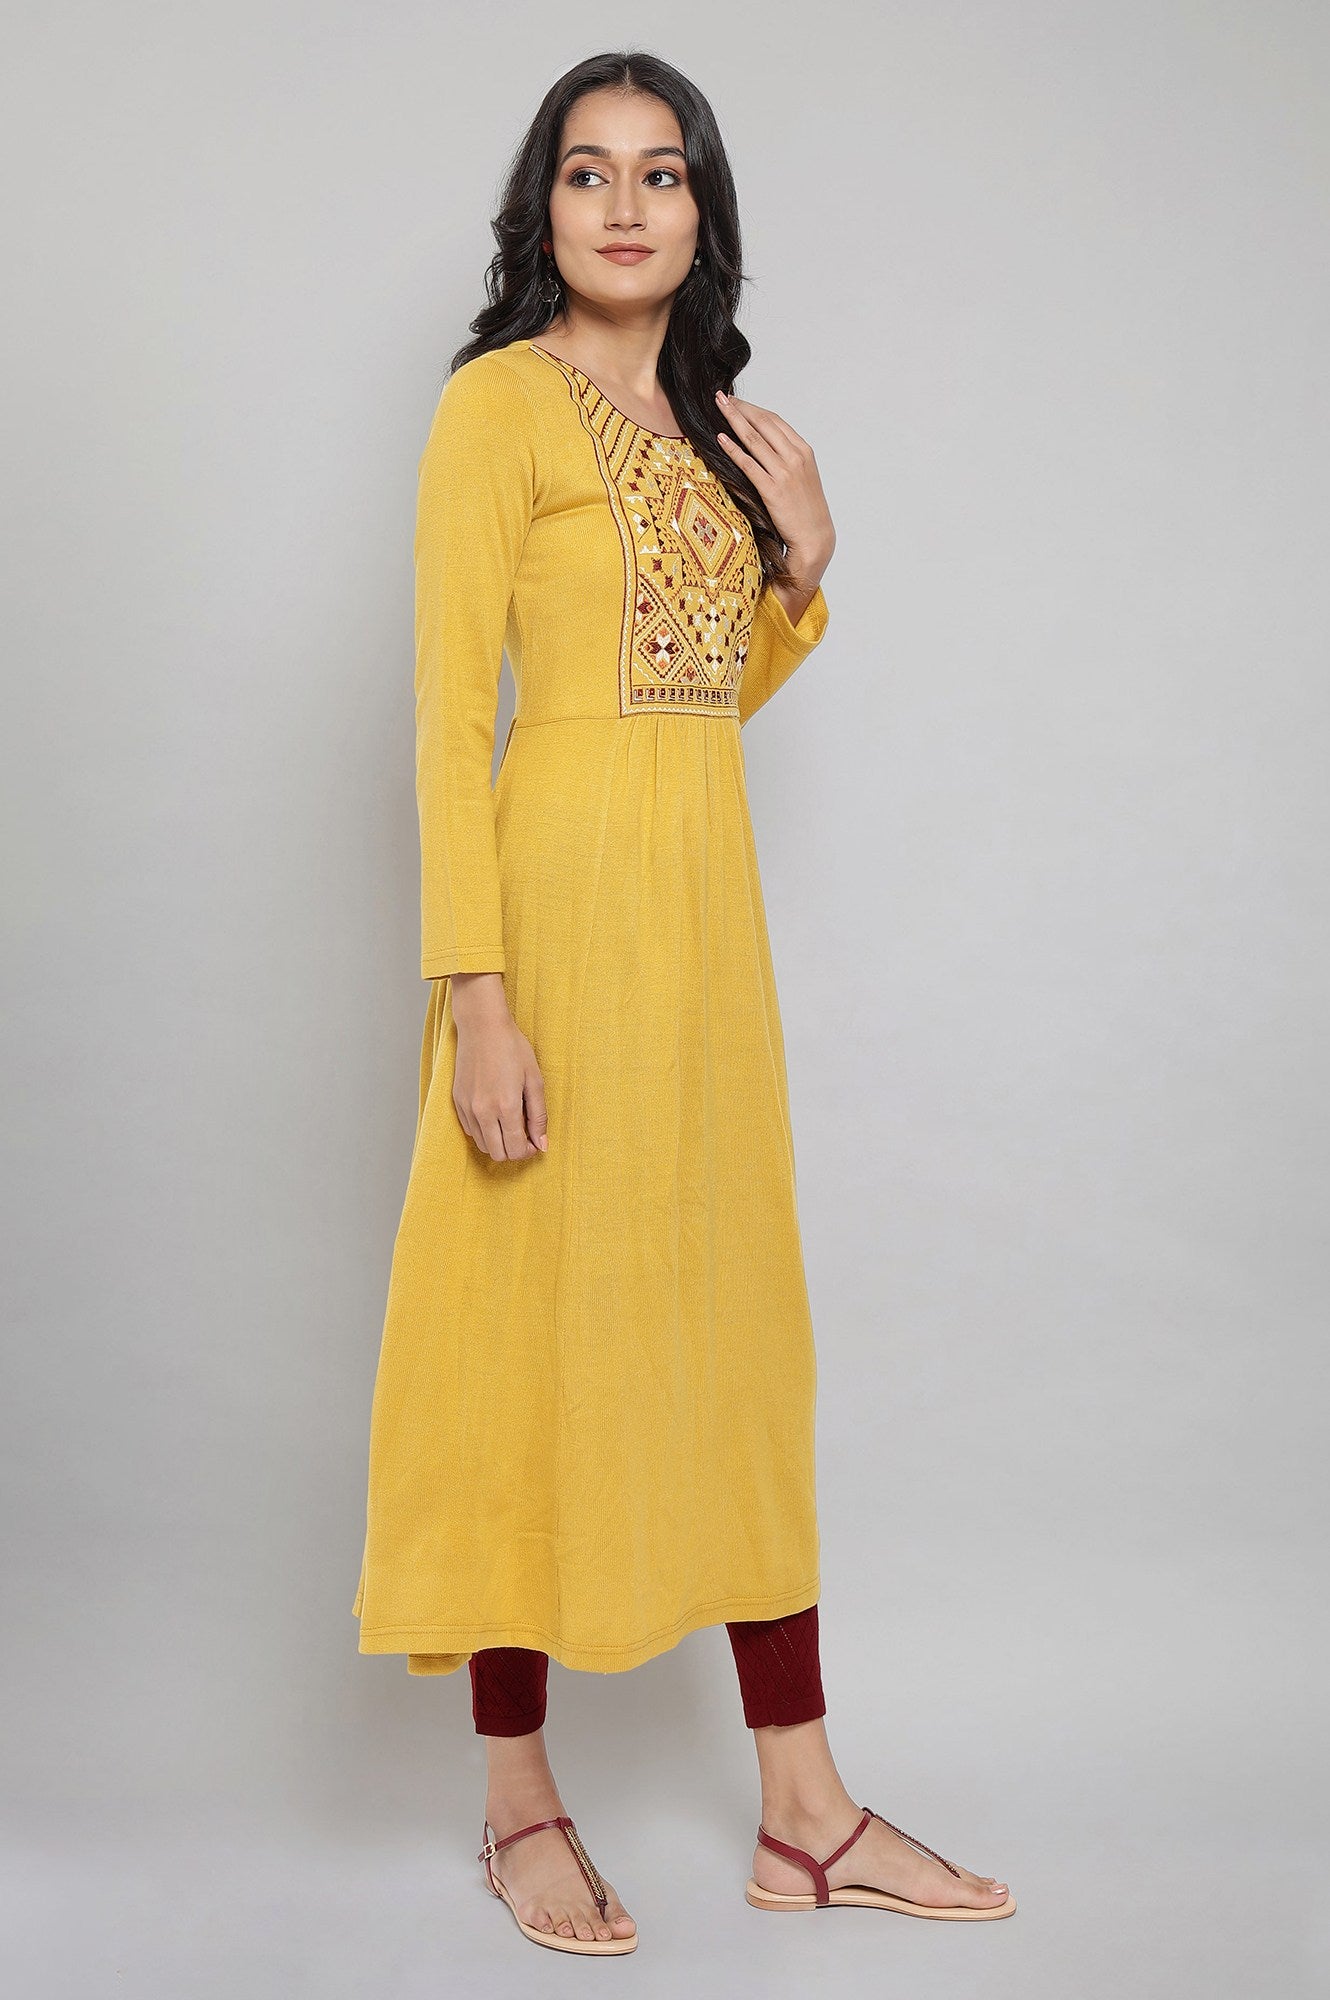 Yellow Acrylic Dress with Embroidery